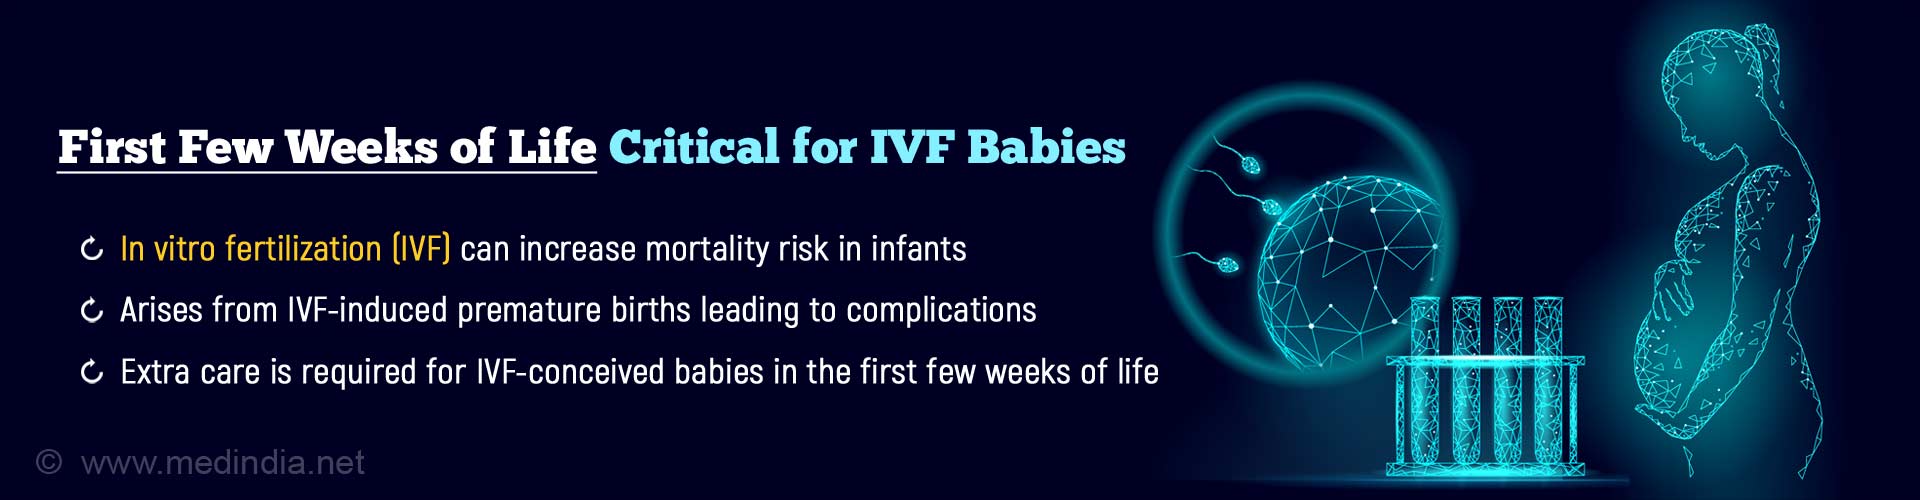 First few weeks of life critical for IVF babies. In vitro fertilization (IVF) can increase mortality risk in infants. Arises from IVF-induced premature births leading to complications. Extra care is required for IVF-conceived babies in the first few weeks of life.